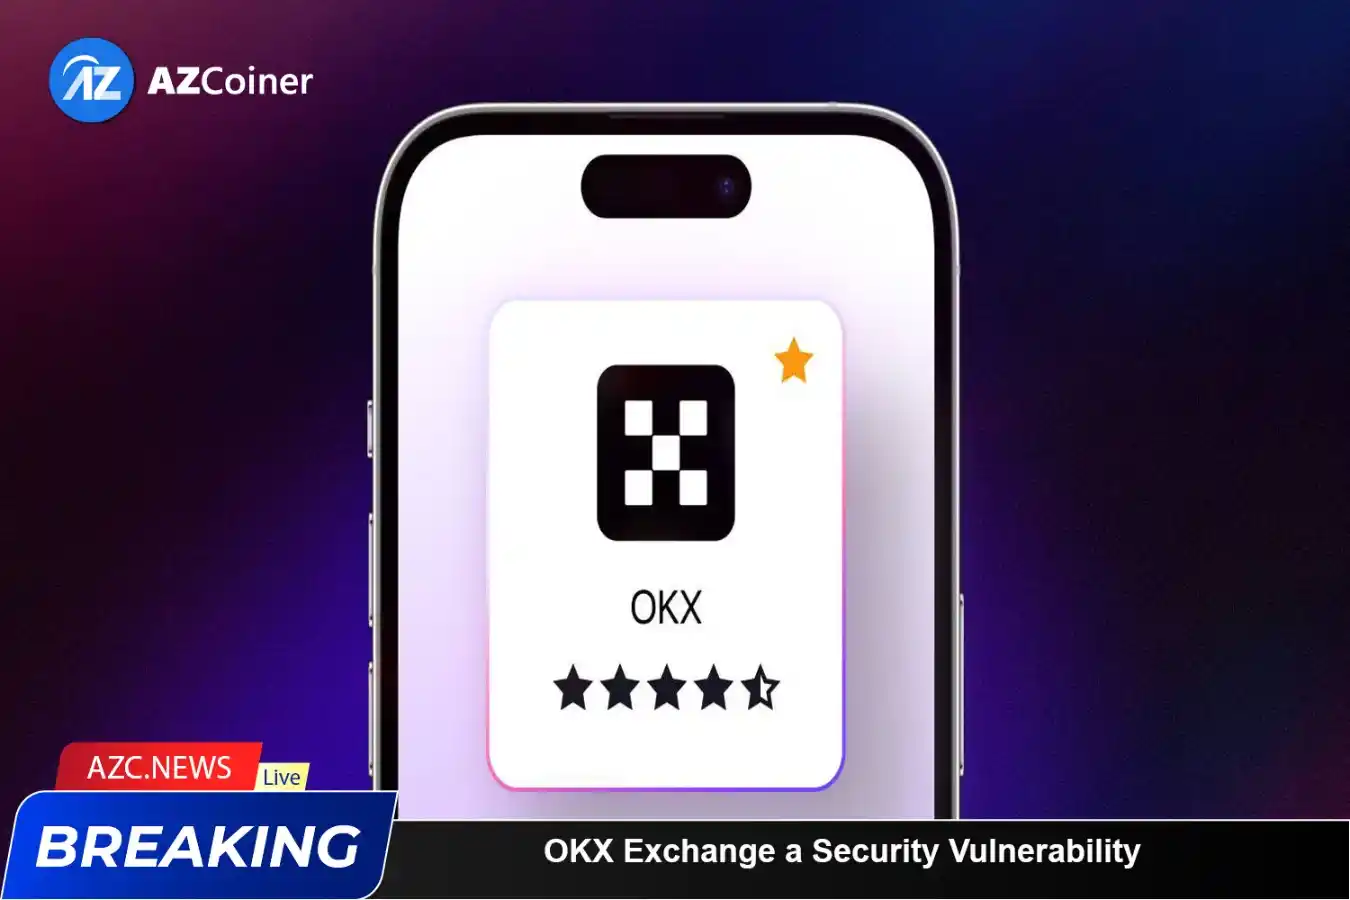 Okx Exchange Had A Security Vulnerability In The Ios Application_65b97394a506c.webp